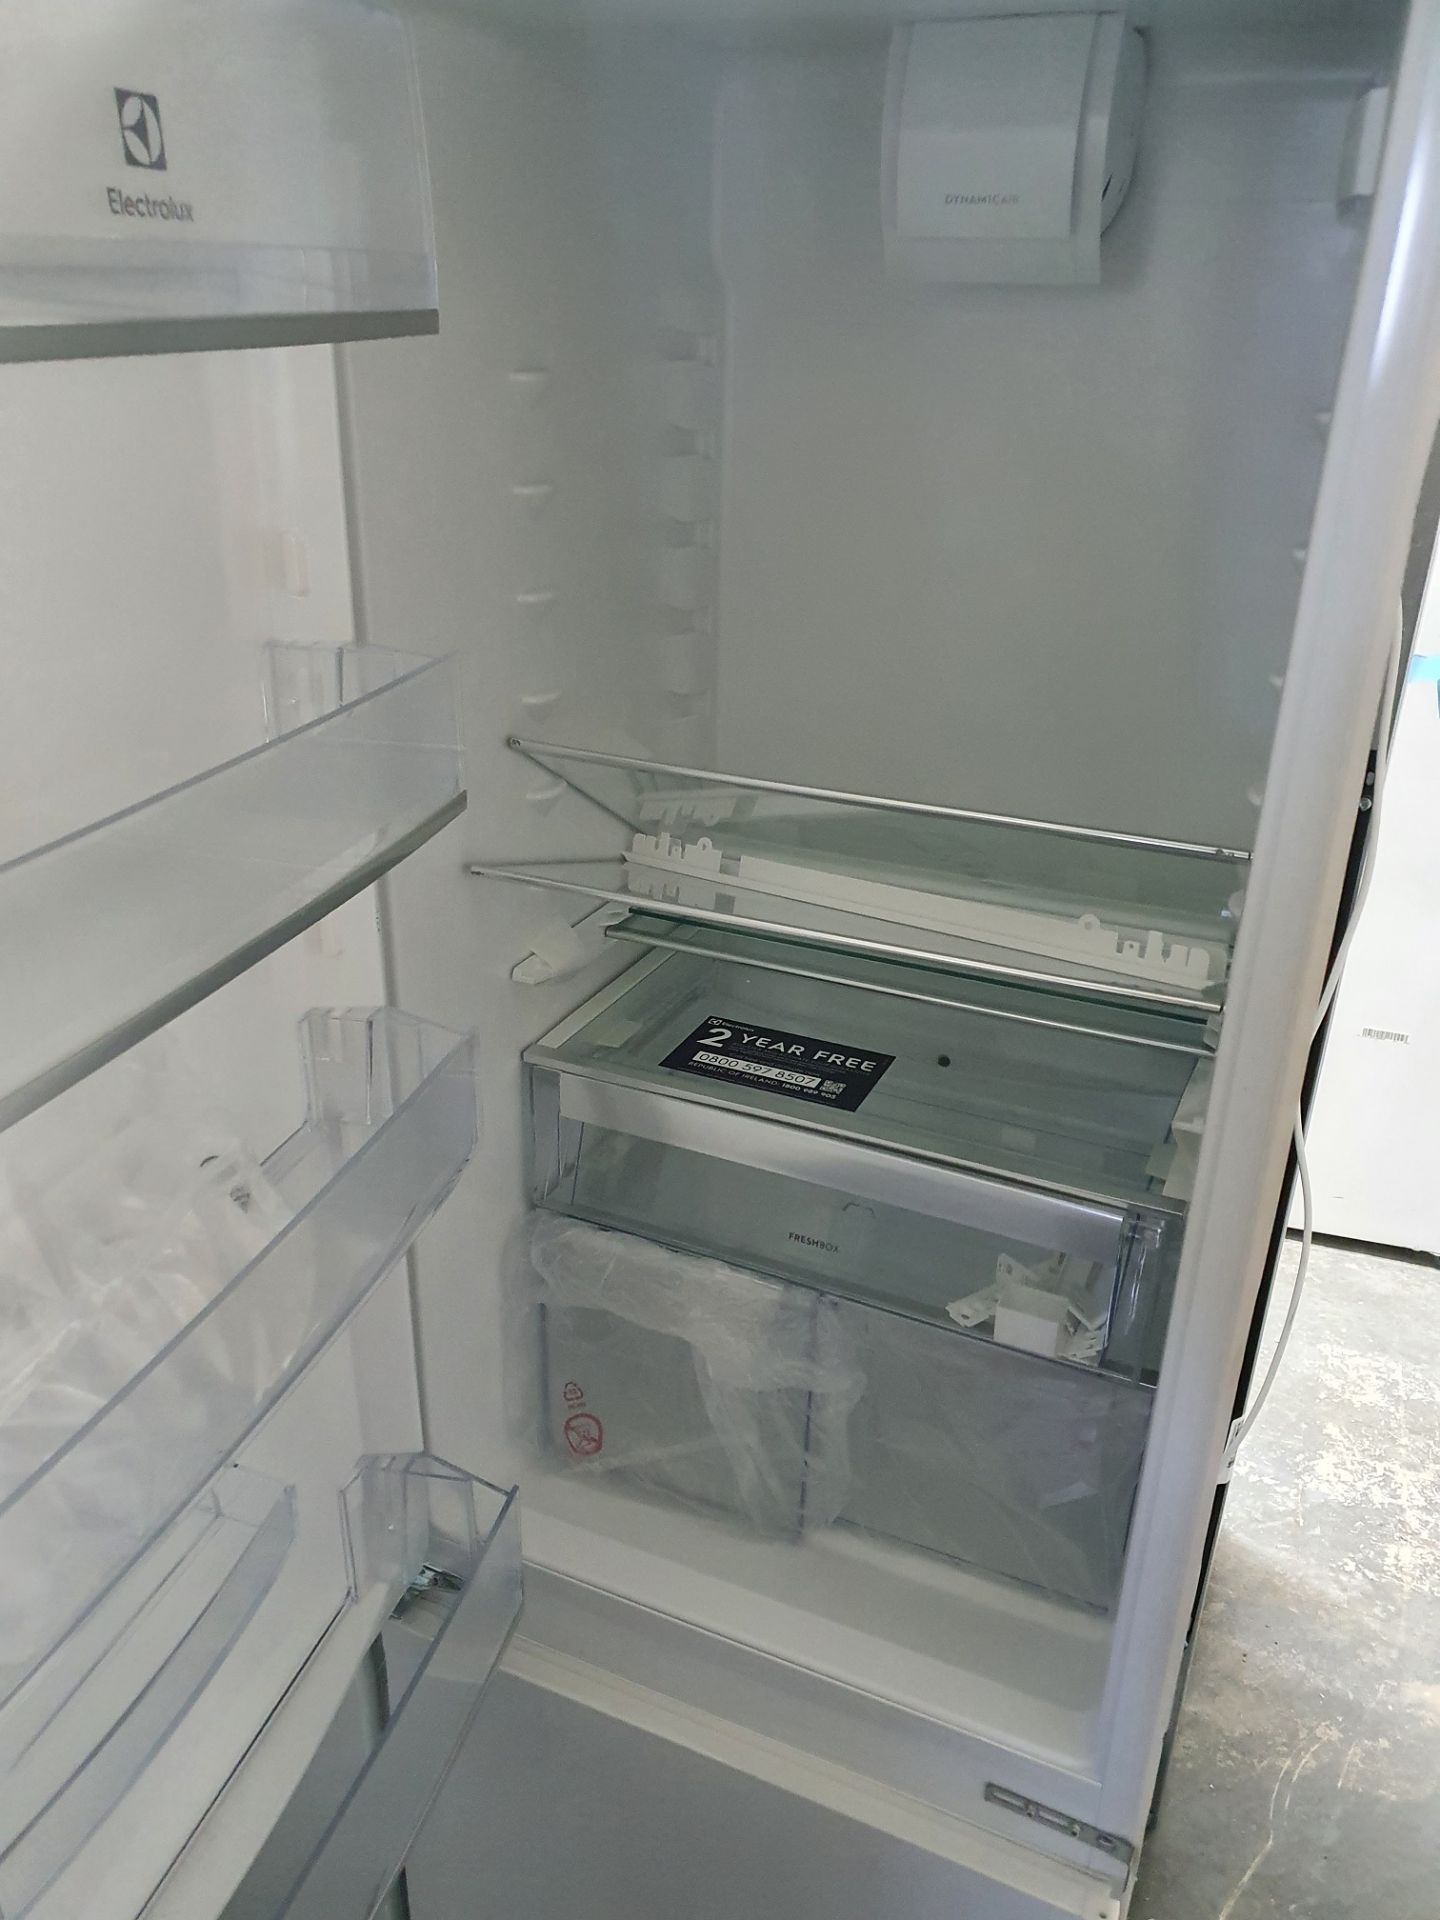 NEW/GRADED AND UNPACKAGED Prima Plus PRRF700 Built In Frost Free Fridge Freezer (Brand new slight - Image 11 of 14